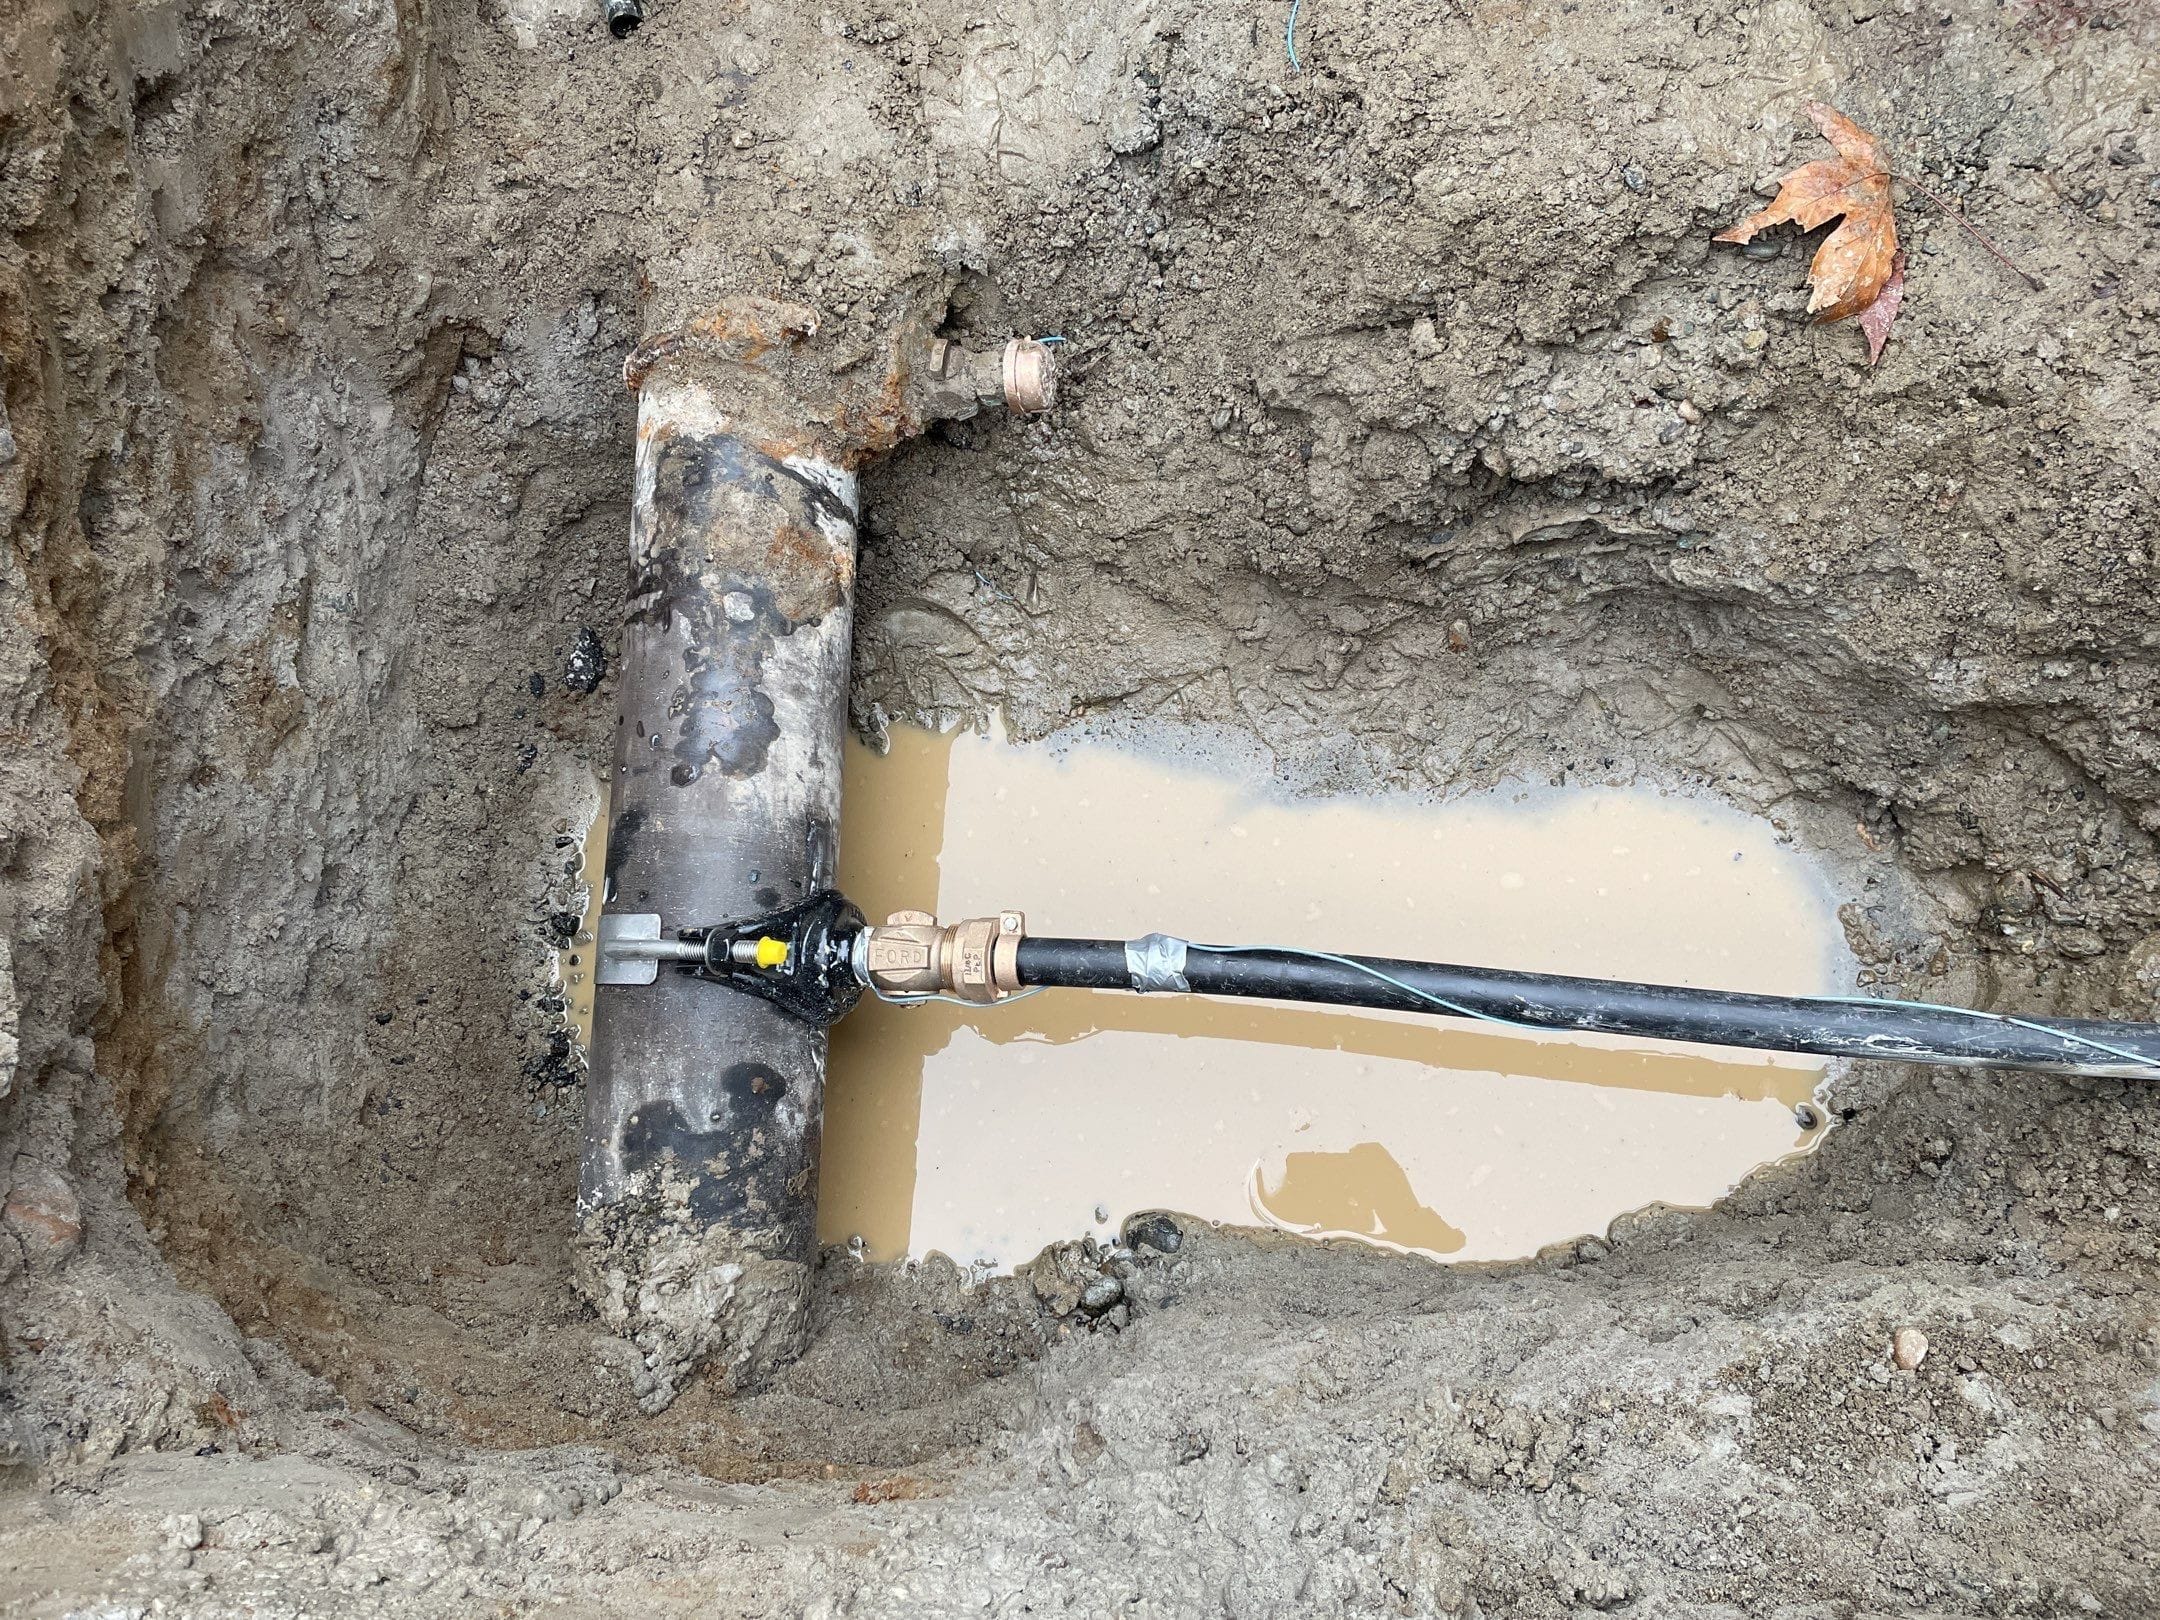 The new water main tap.